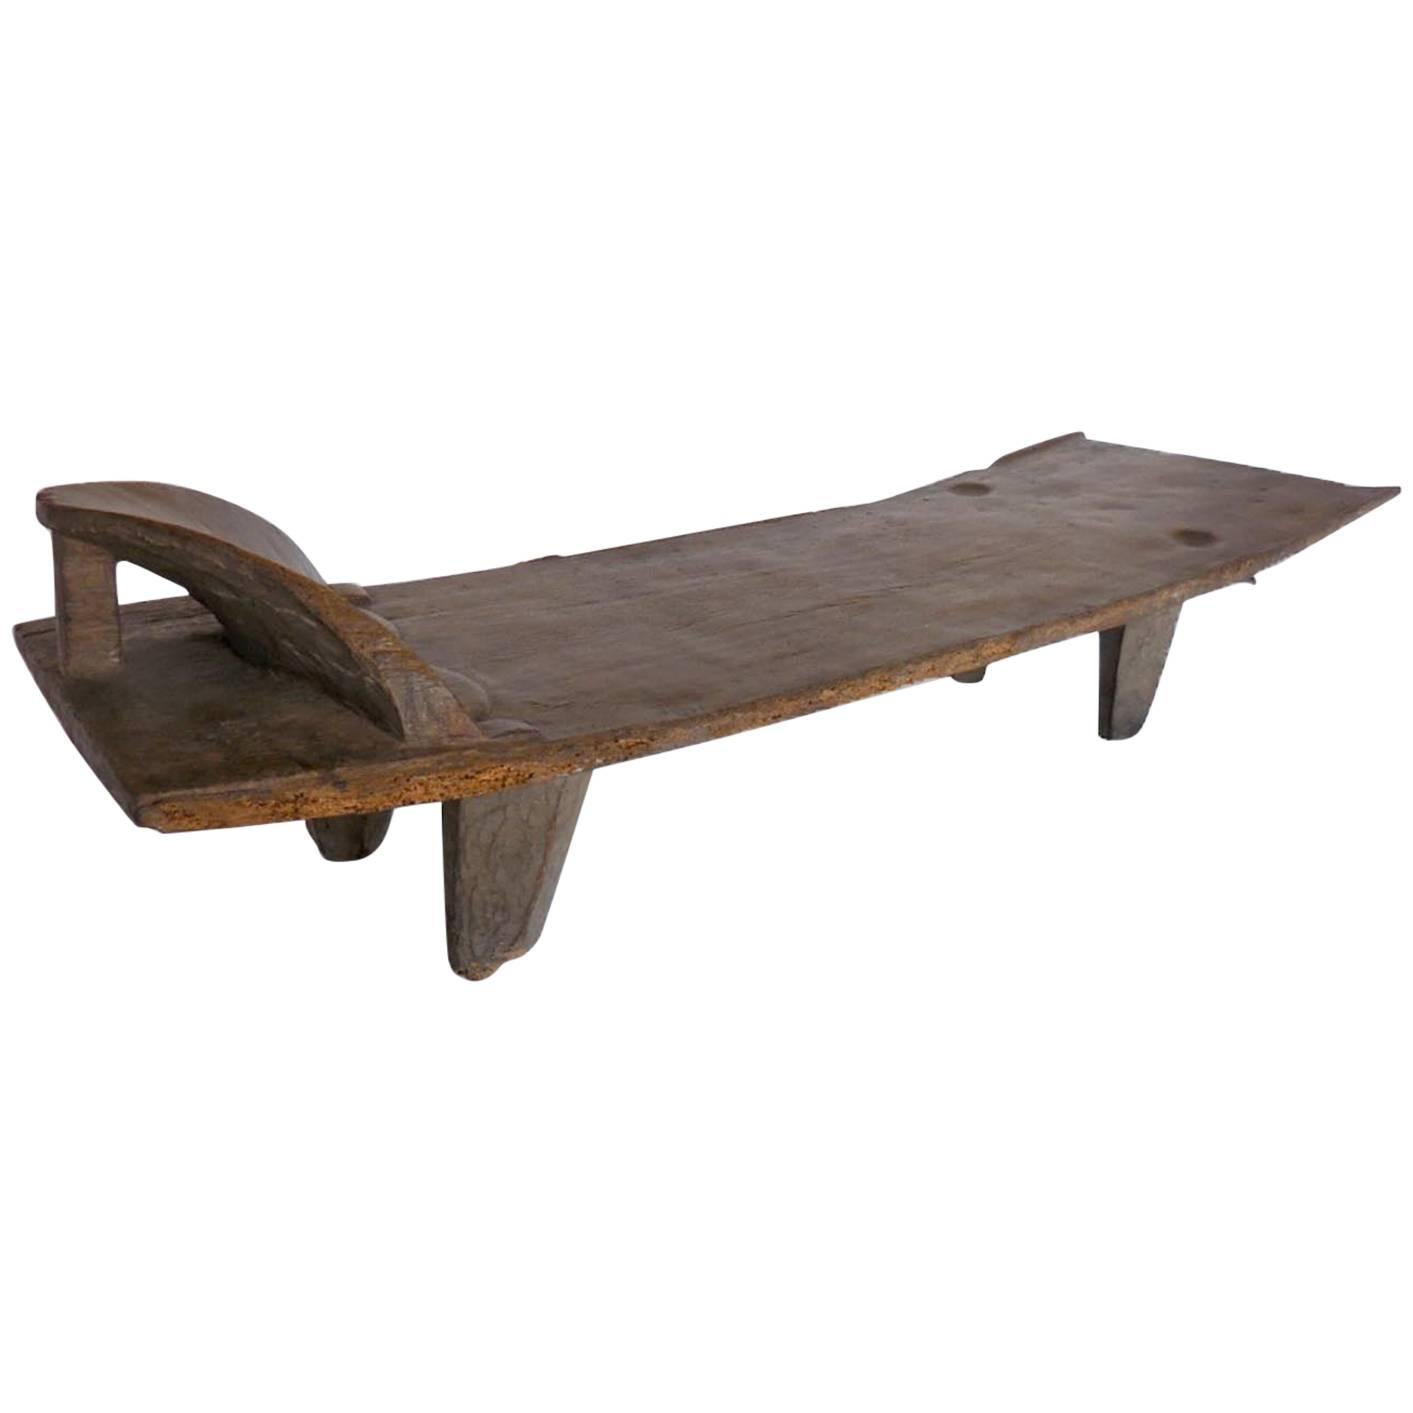 Tribal Bench from Mali